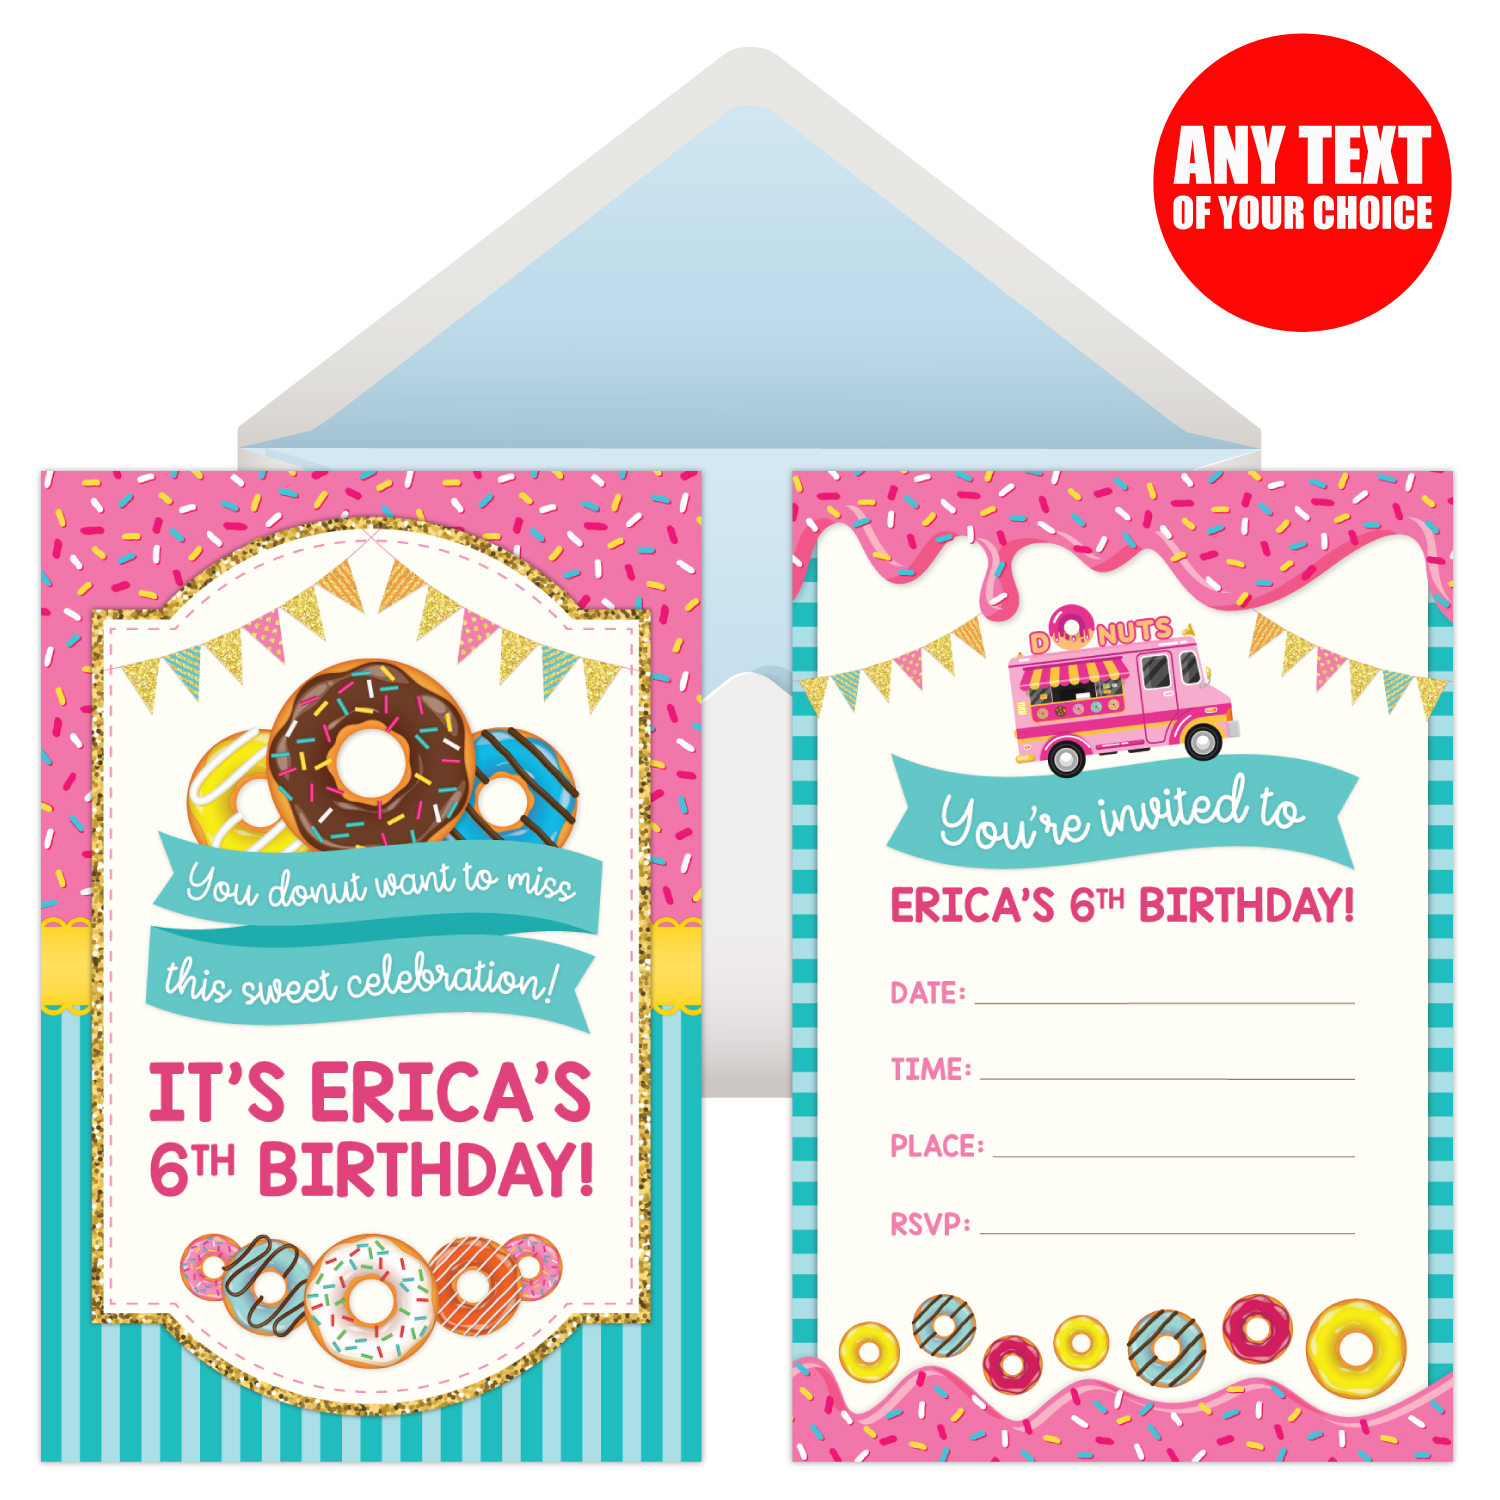 Donut Personalized Invitations 8 Pk Party Supplies Canada Open A Party - roblox personalized invitations 8 pack party supplies canada open a party